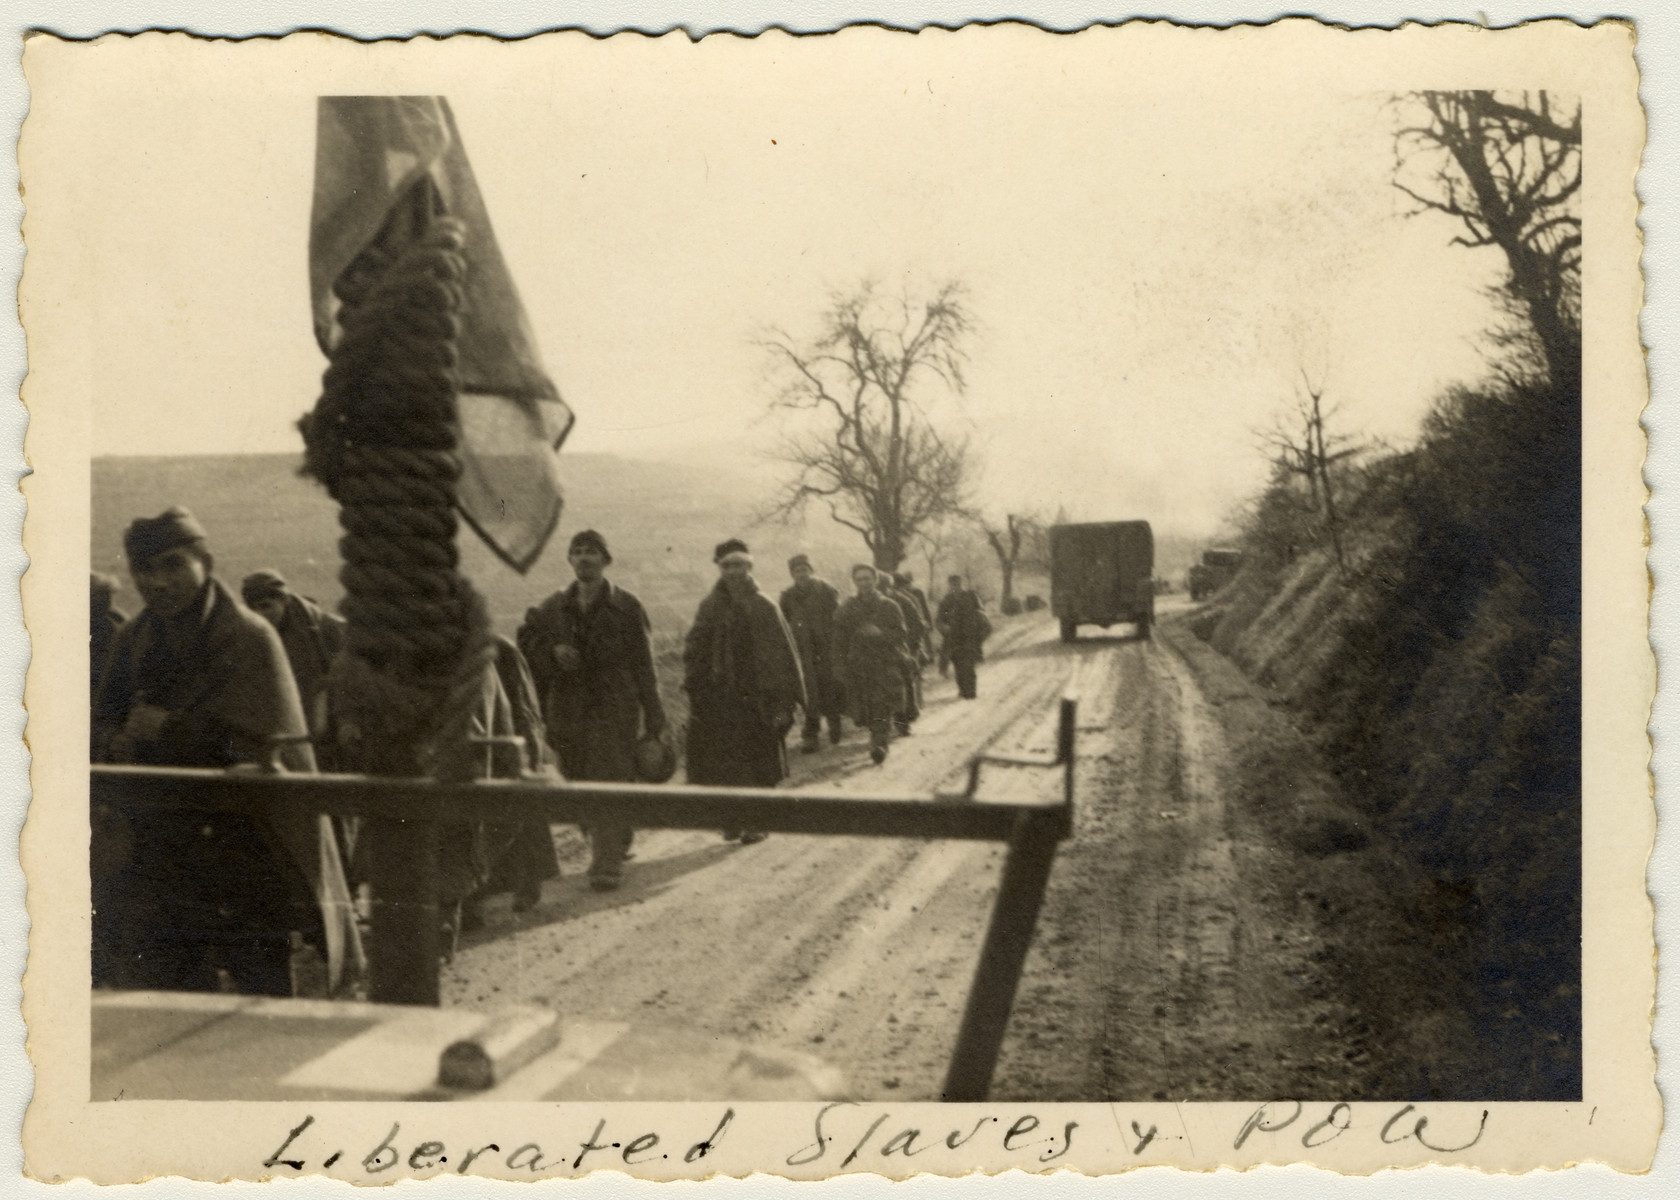 Camp survivors and freed POWs march down a road after their liberation.

The original caption reads: "Liberated slaves and POW."